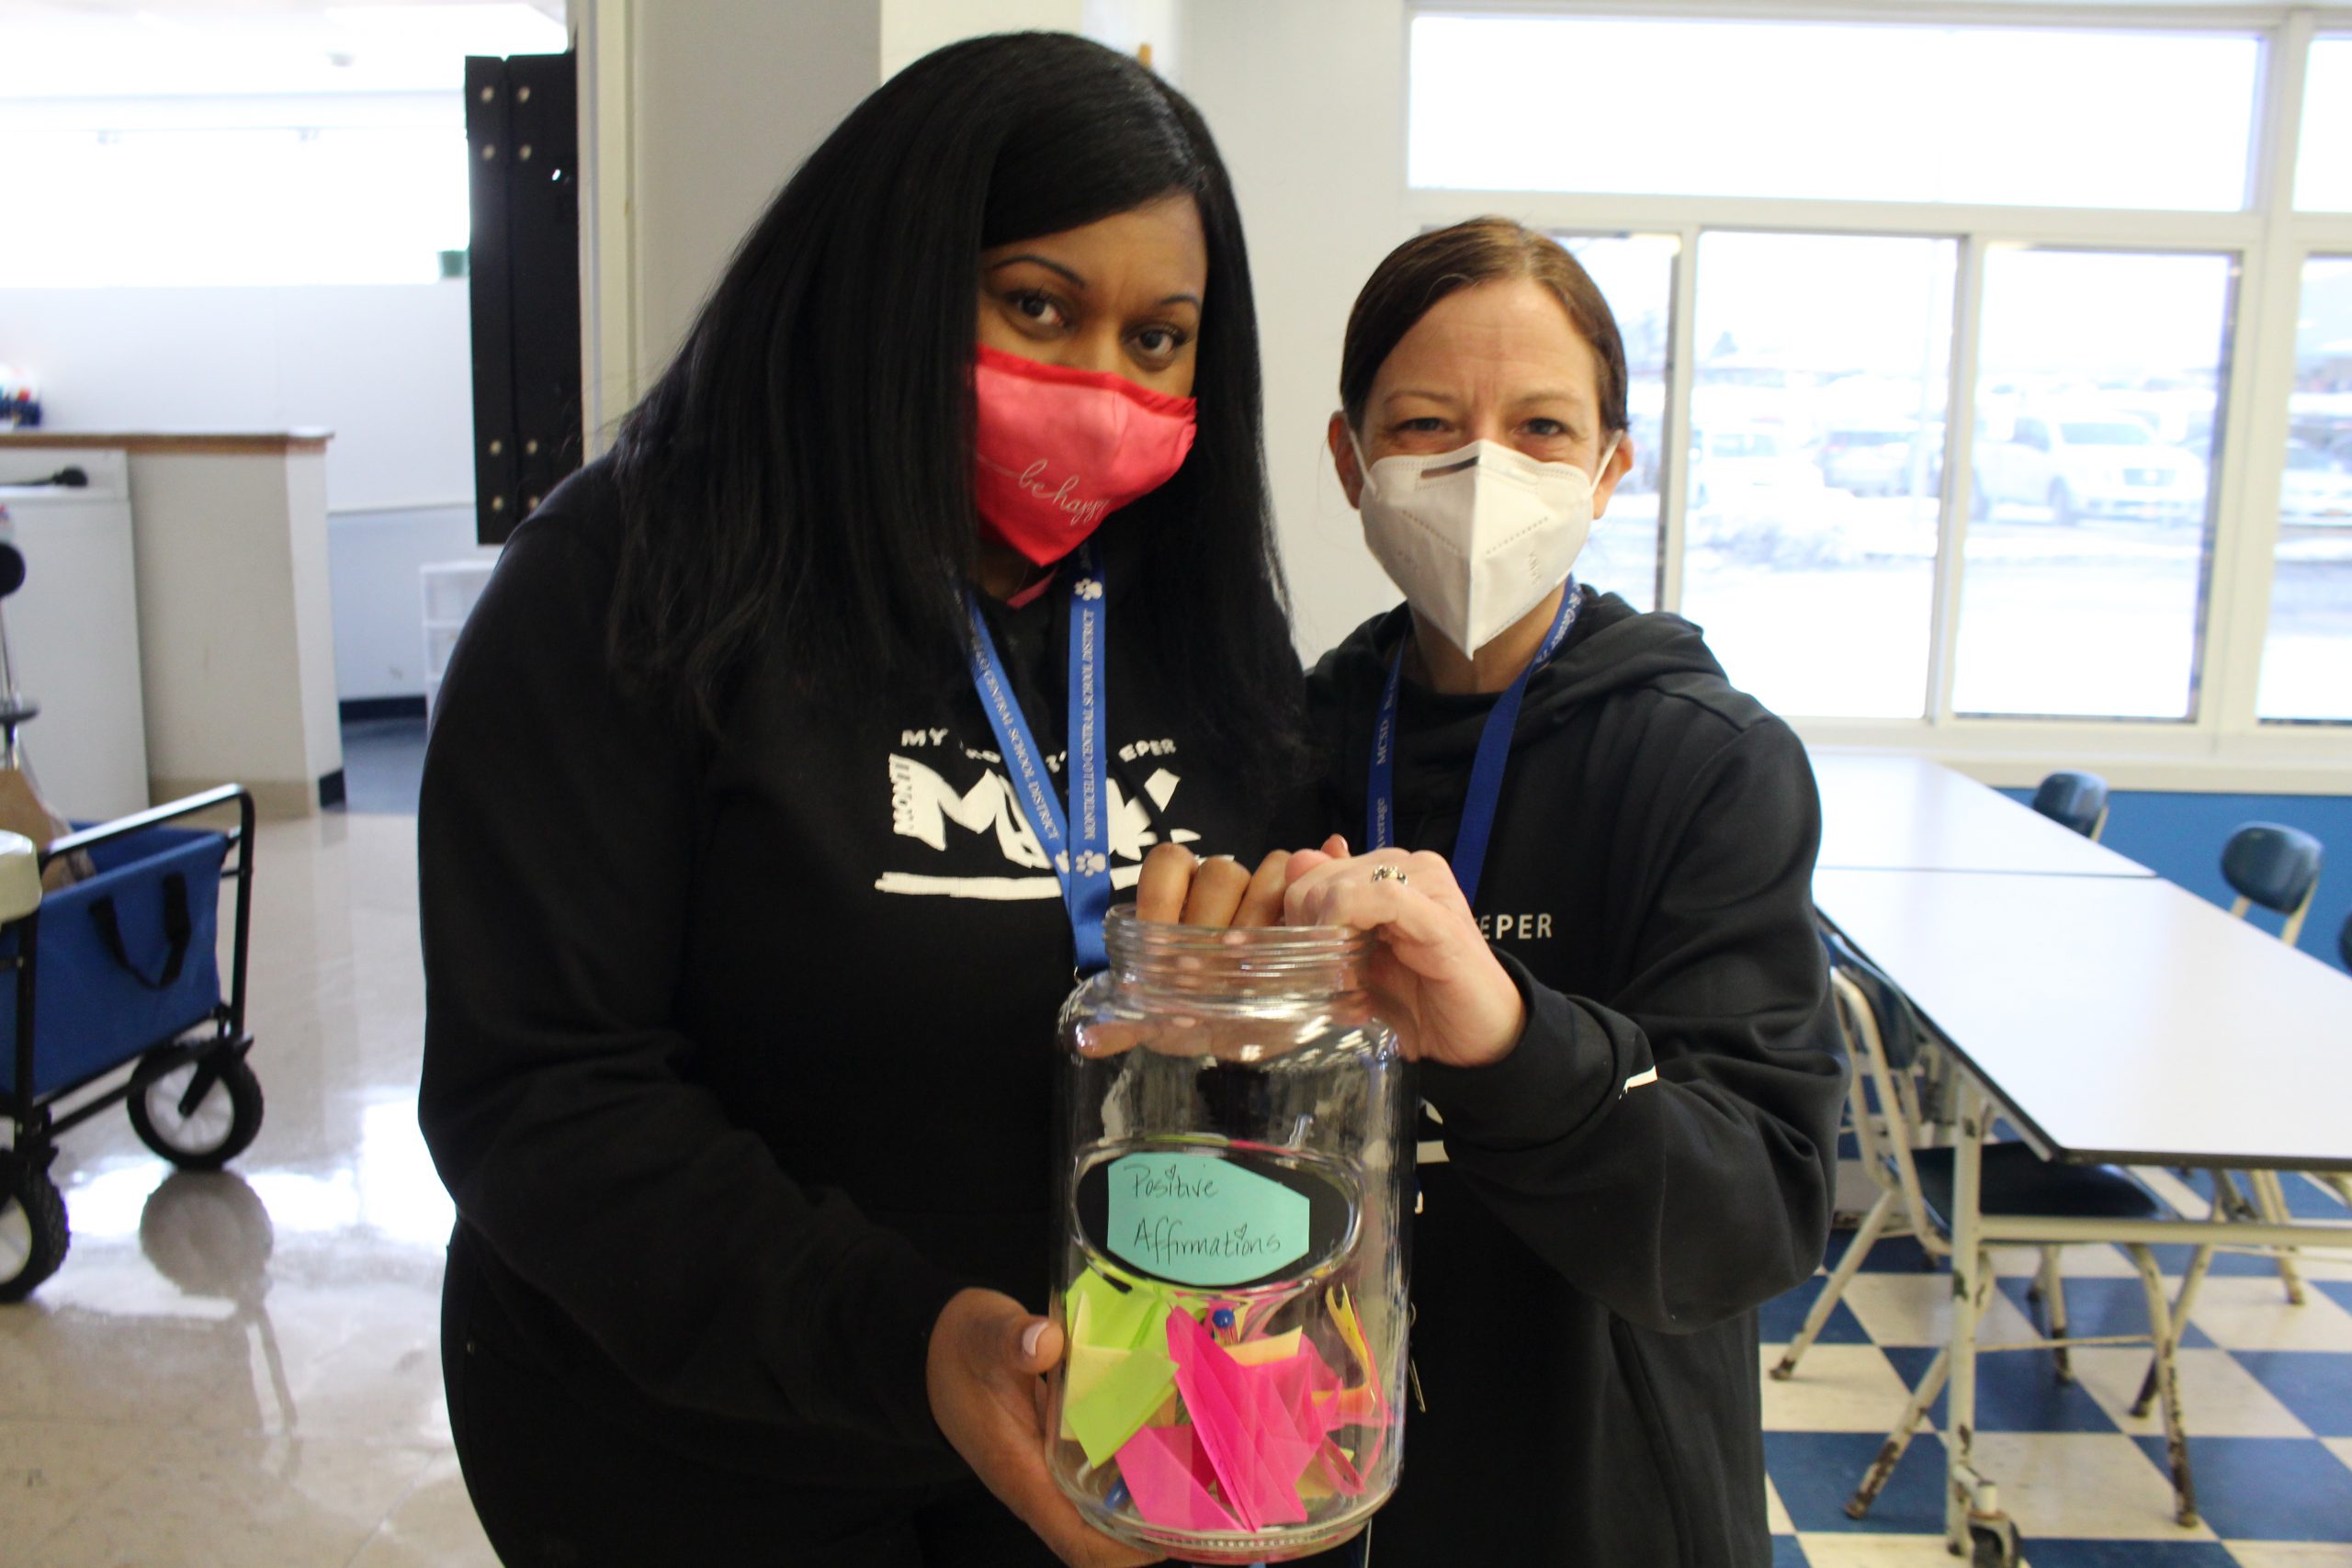 two staff members are holding up a jar that says "positive affirmations"